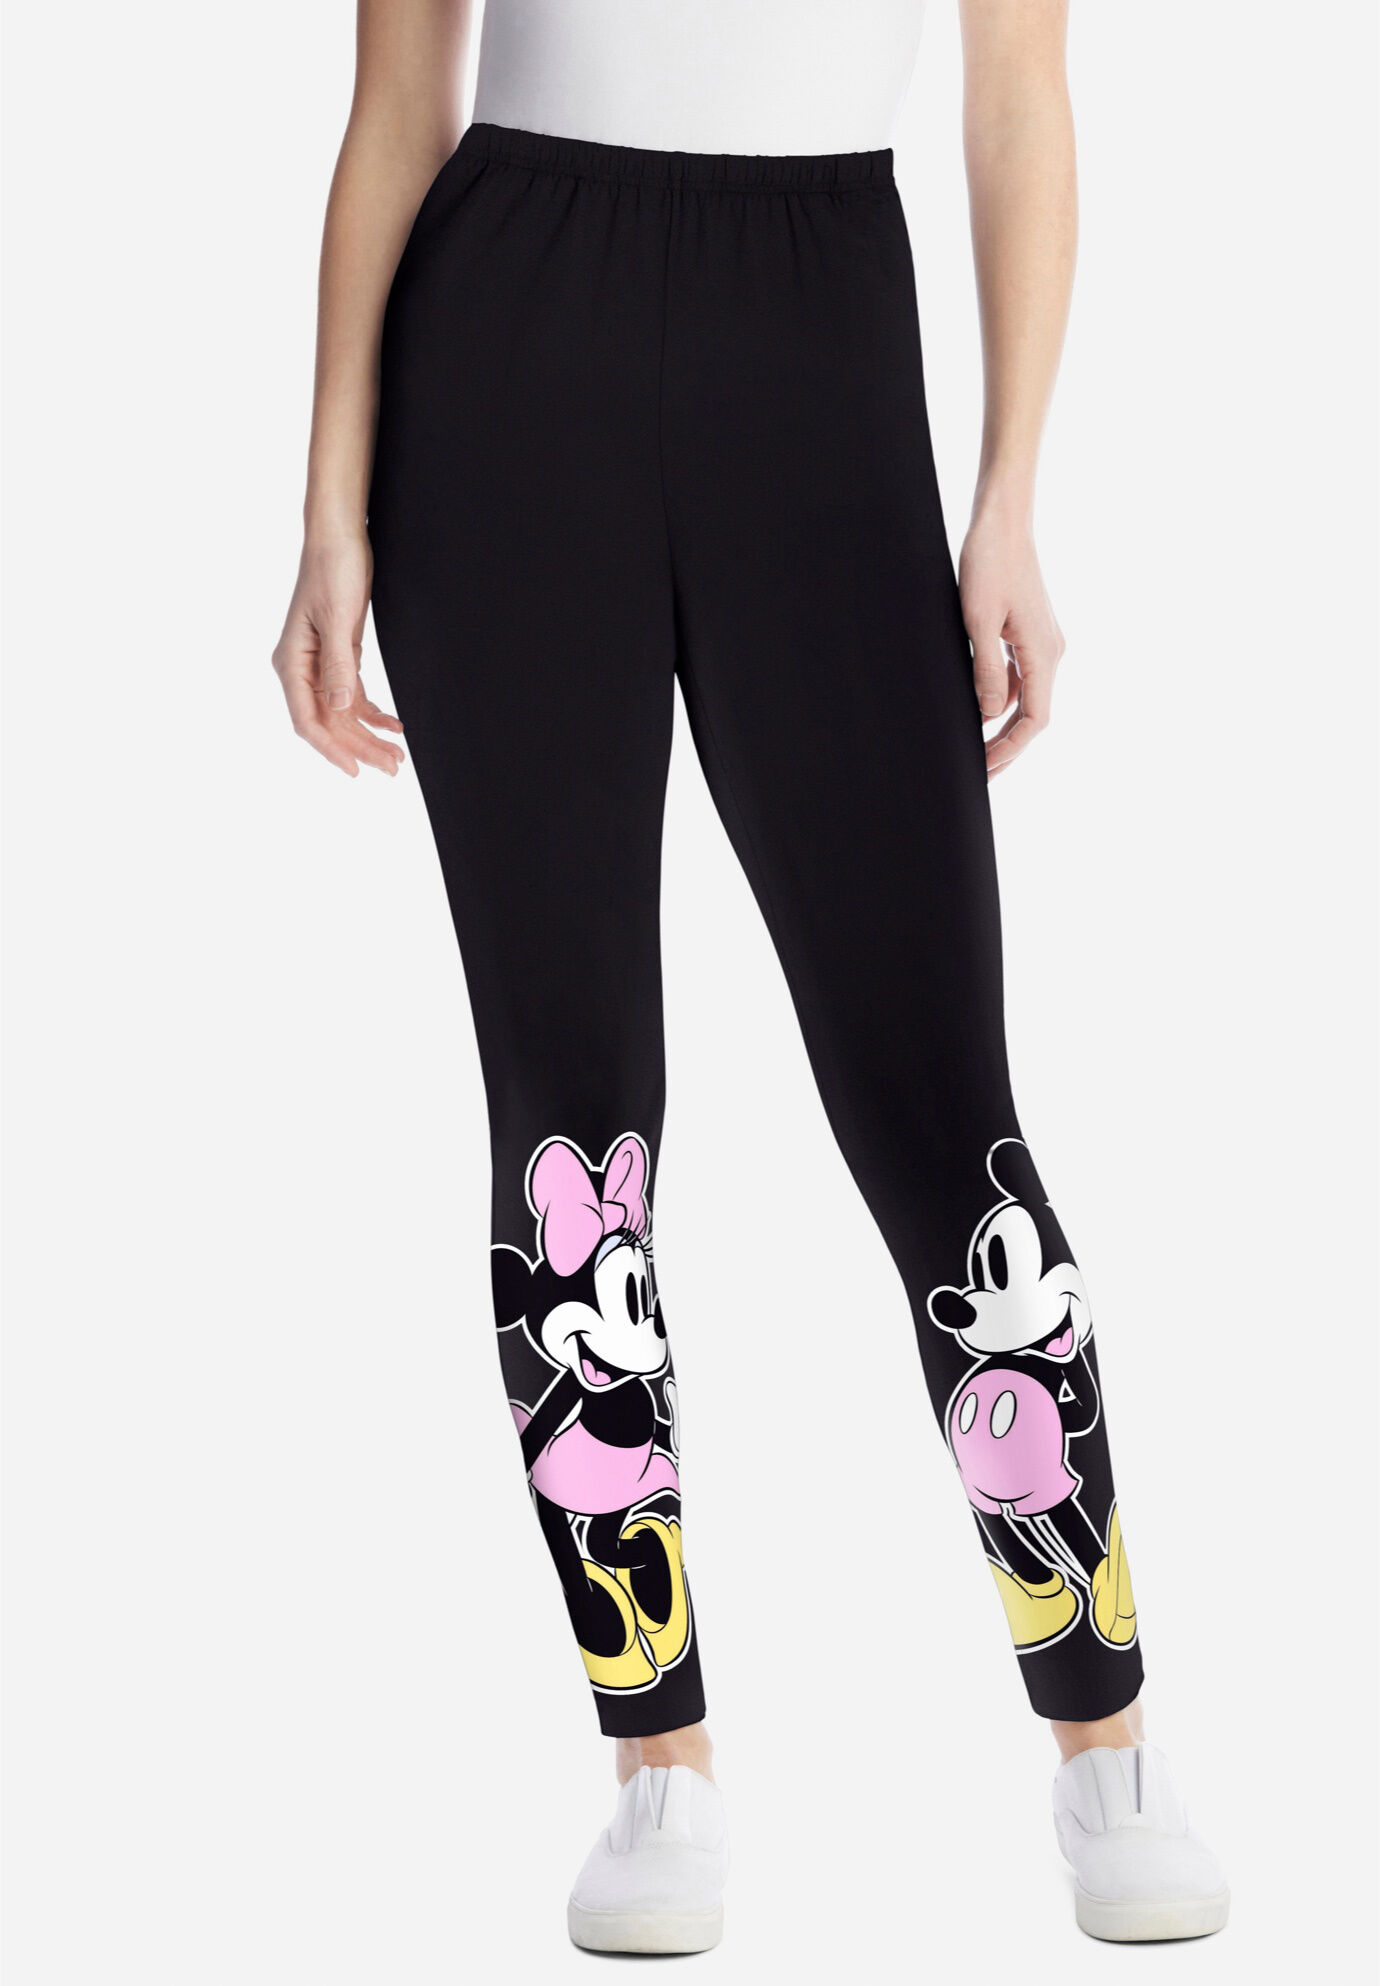 WYO - Wear Your Opinion - High Waisted Disney Leggings Available @  www.WYO.in Super Stretchable for days when you have to go for your dance  sessions, your cardio or for some yoga !